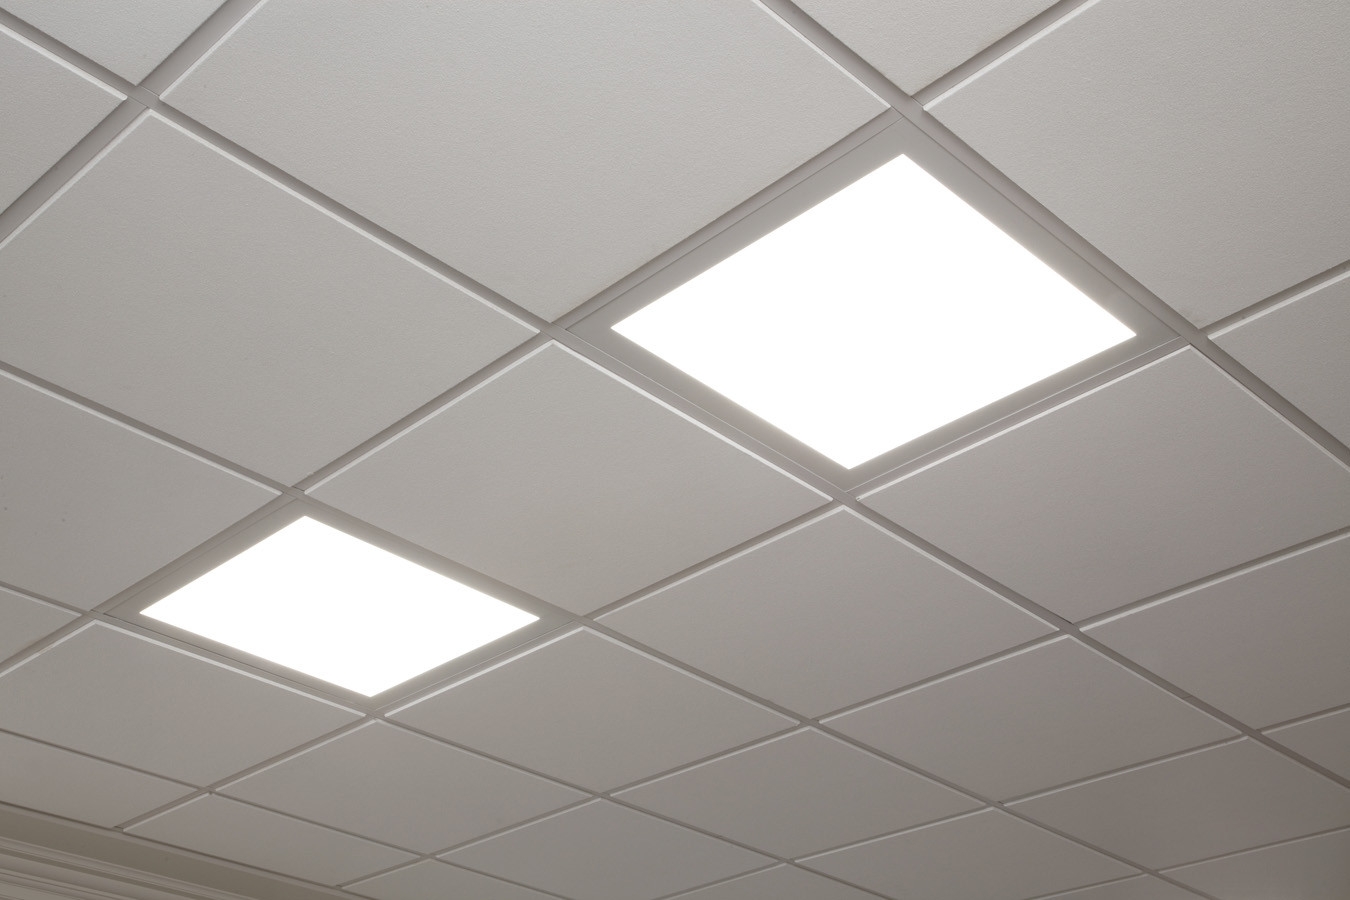 Permalink to Suspended Ceiling Light Diffusers